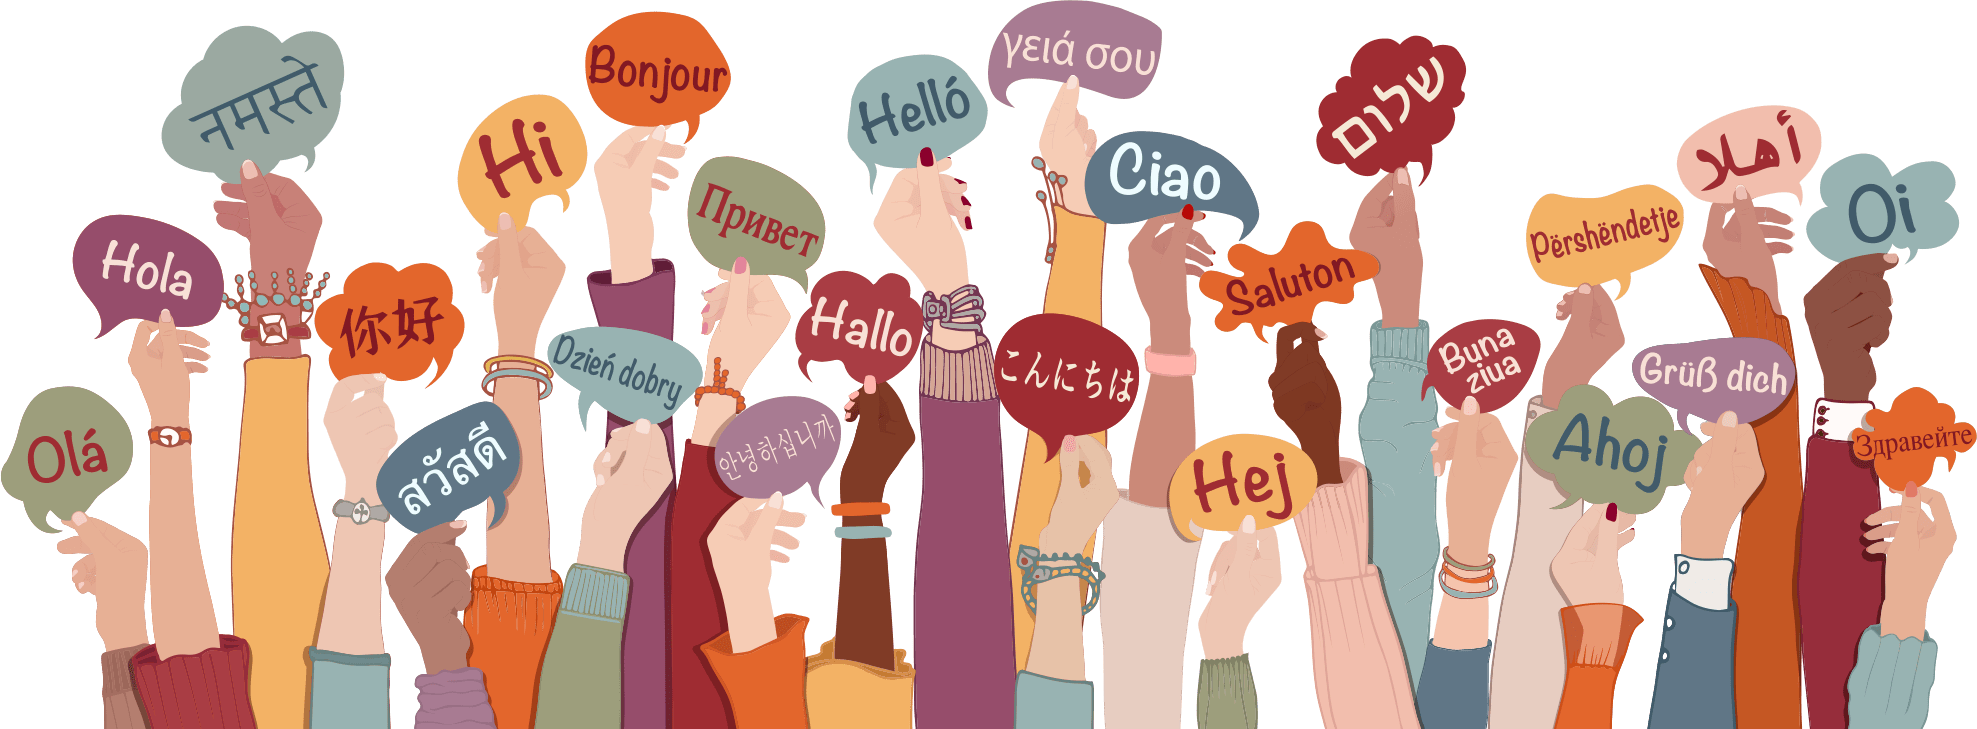 vector illustration of hands holding speech bubbles of the word hello in different languages